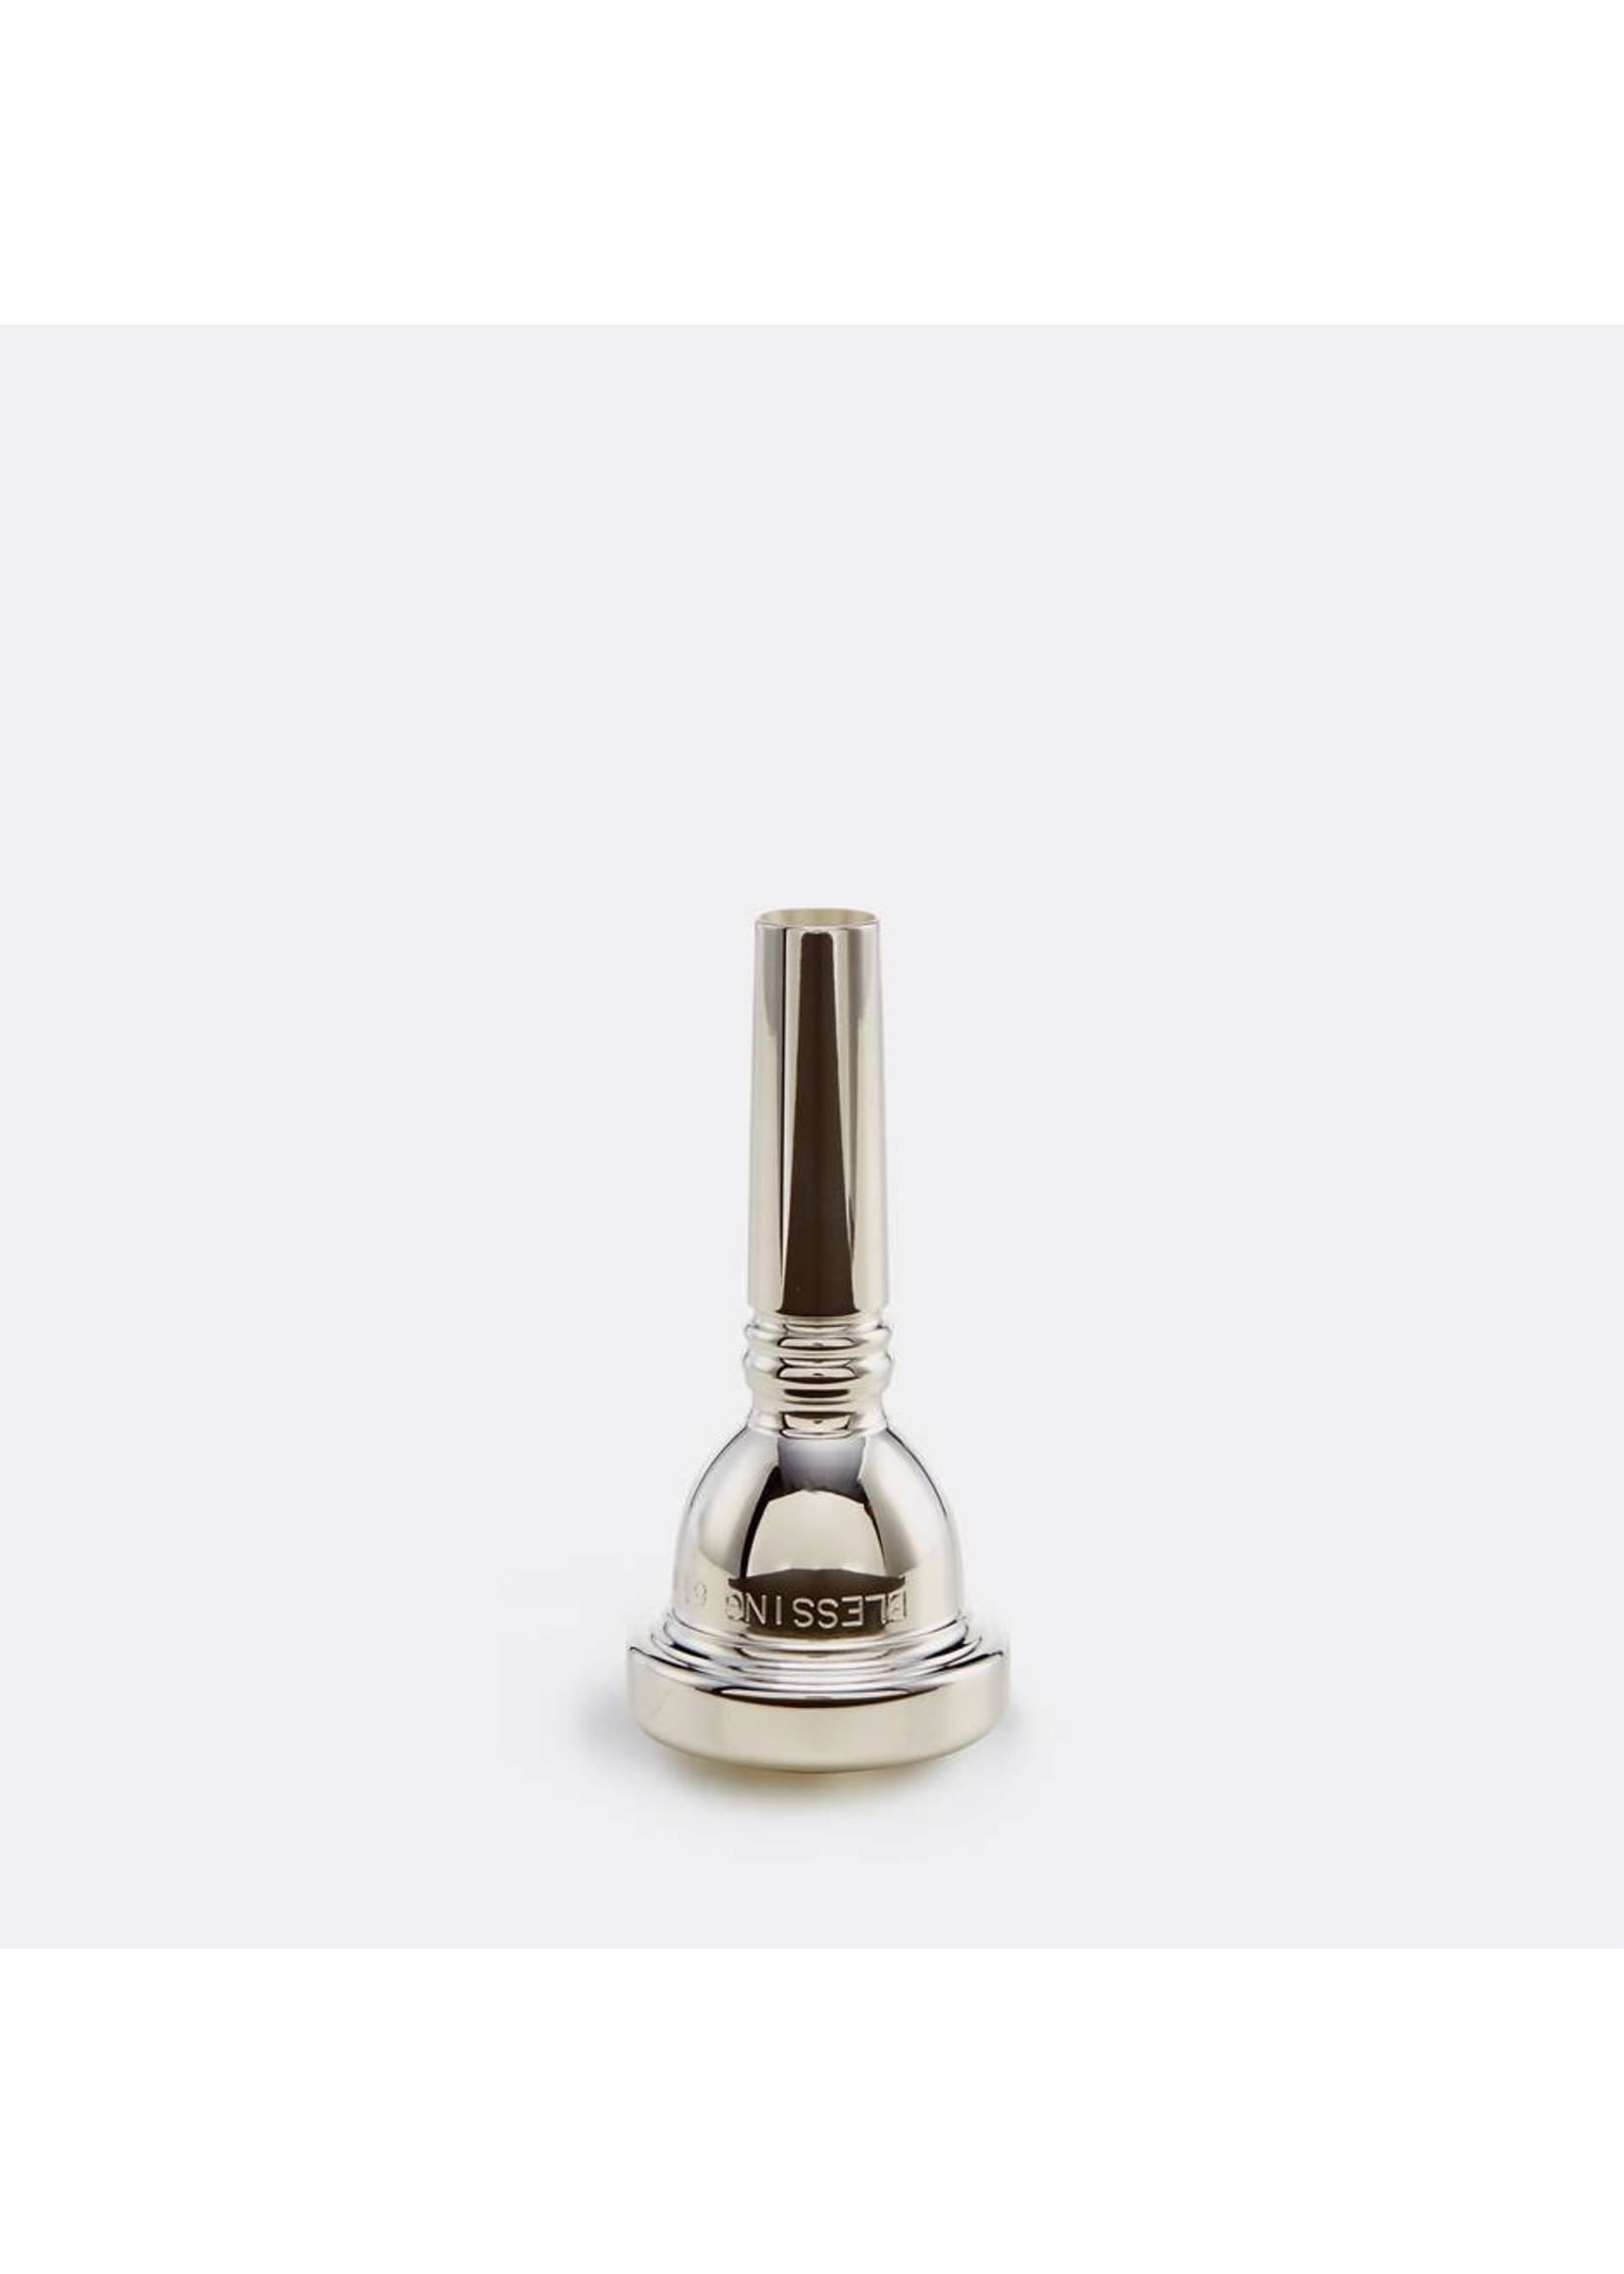 Blessing Blessing 6.5AL Trombone Mouthpiece (Small Shank)